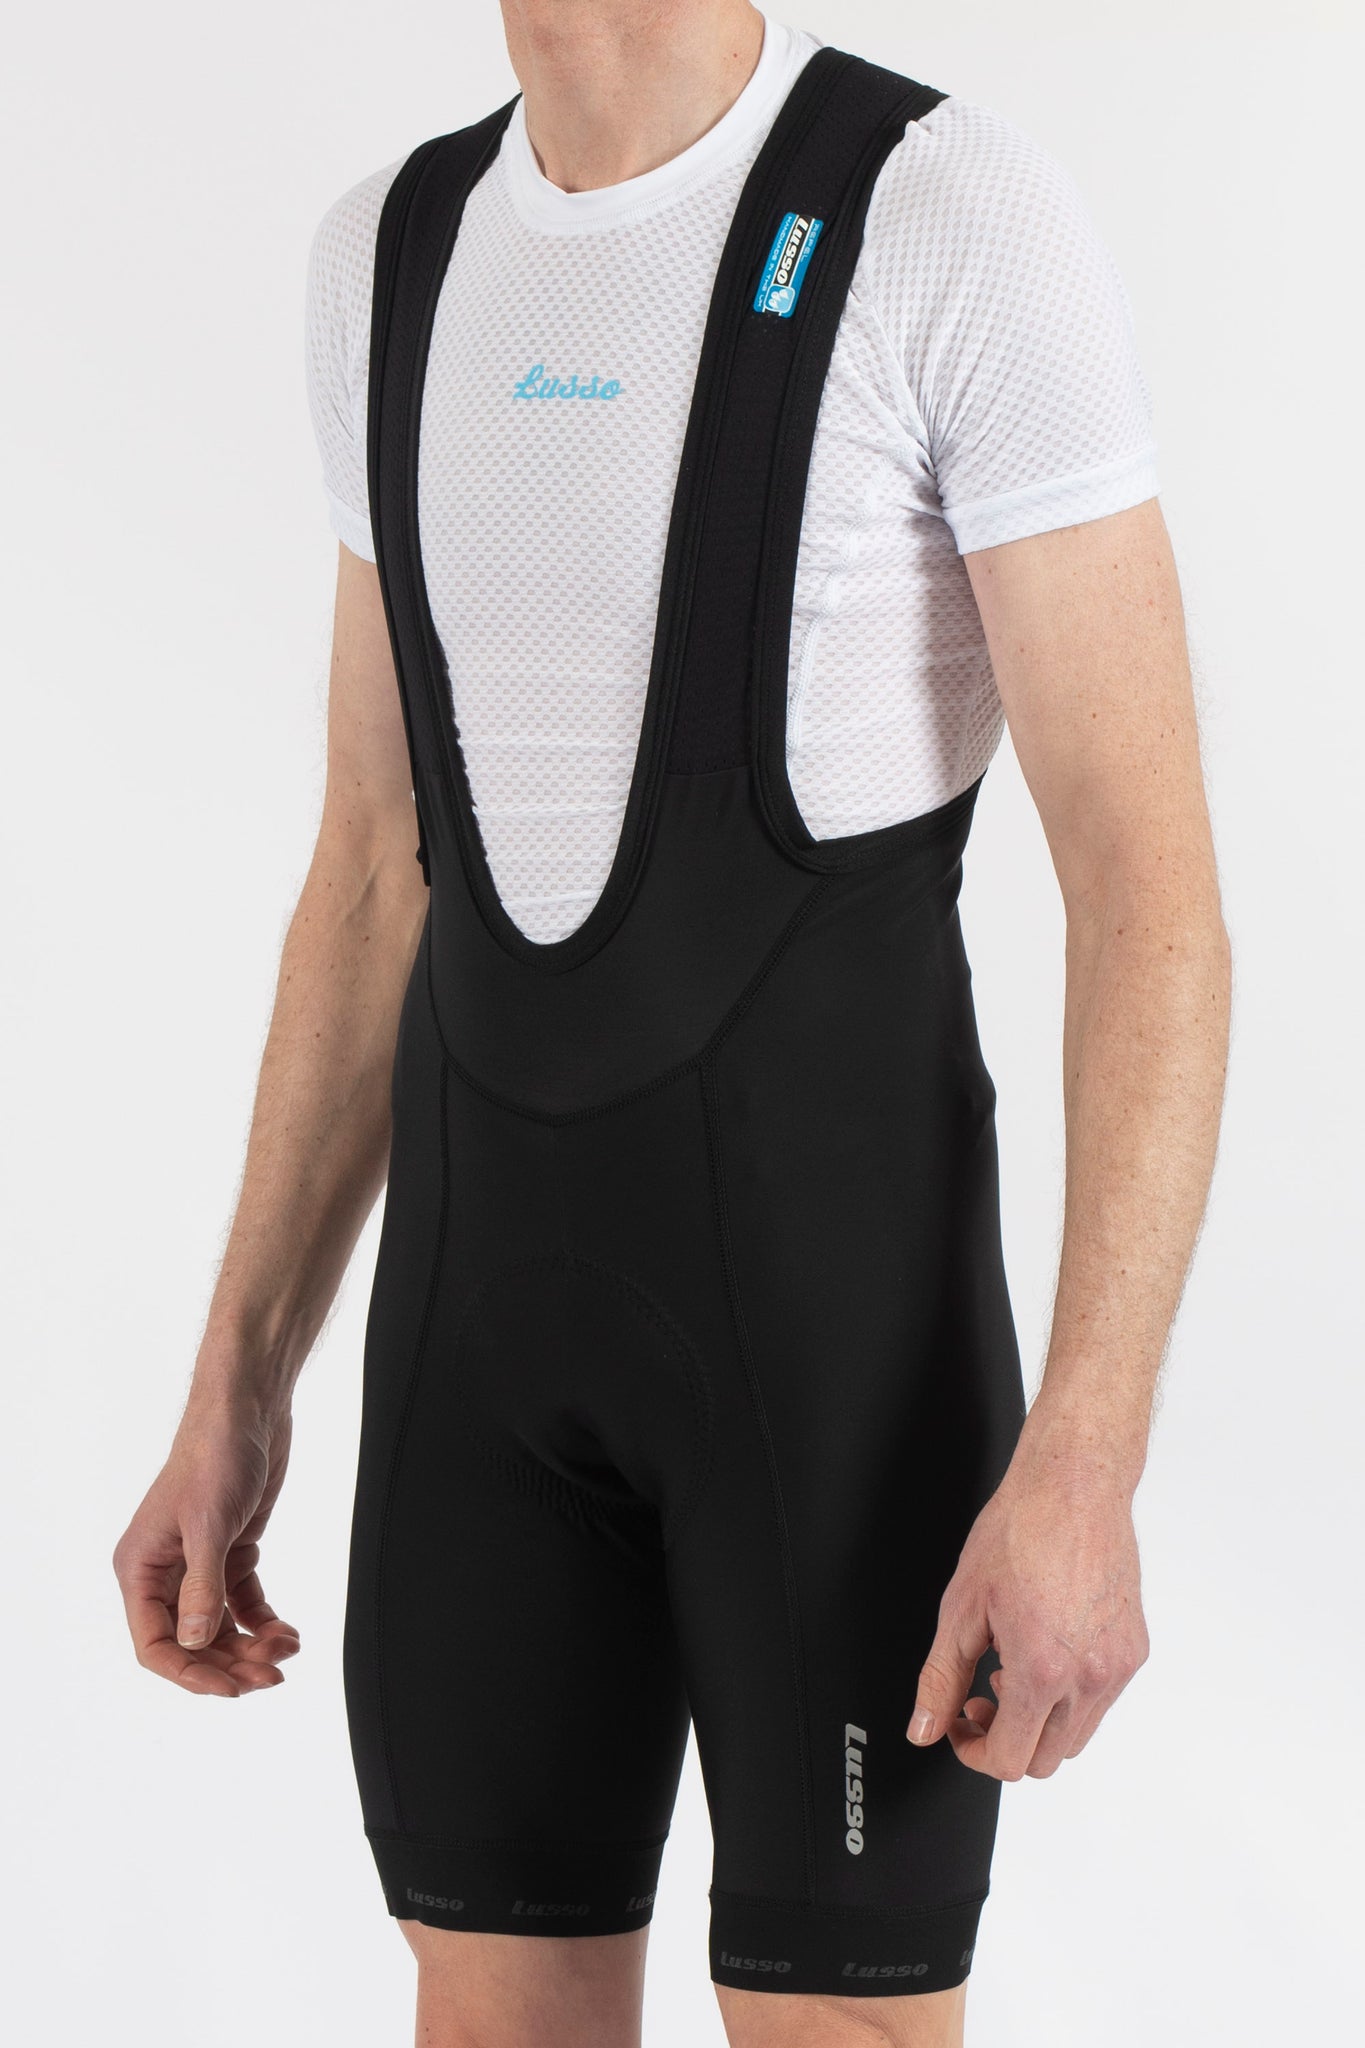 2-Zero Repel Thermal Bibshorts - Lusso Cycle Wear